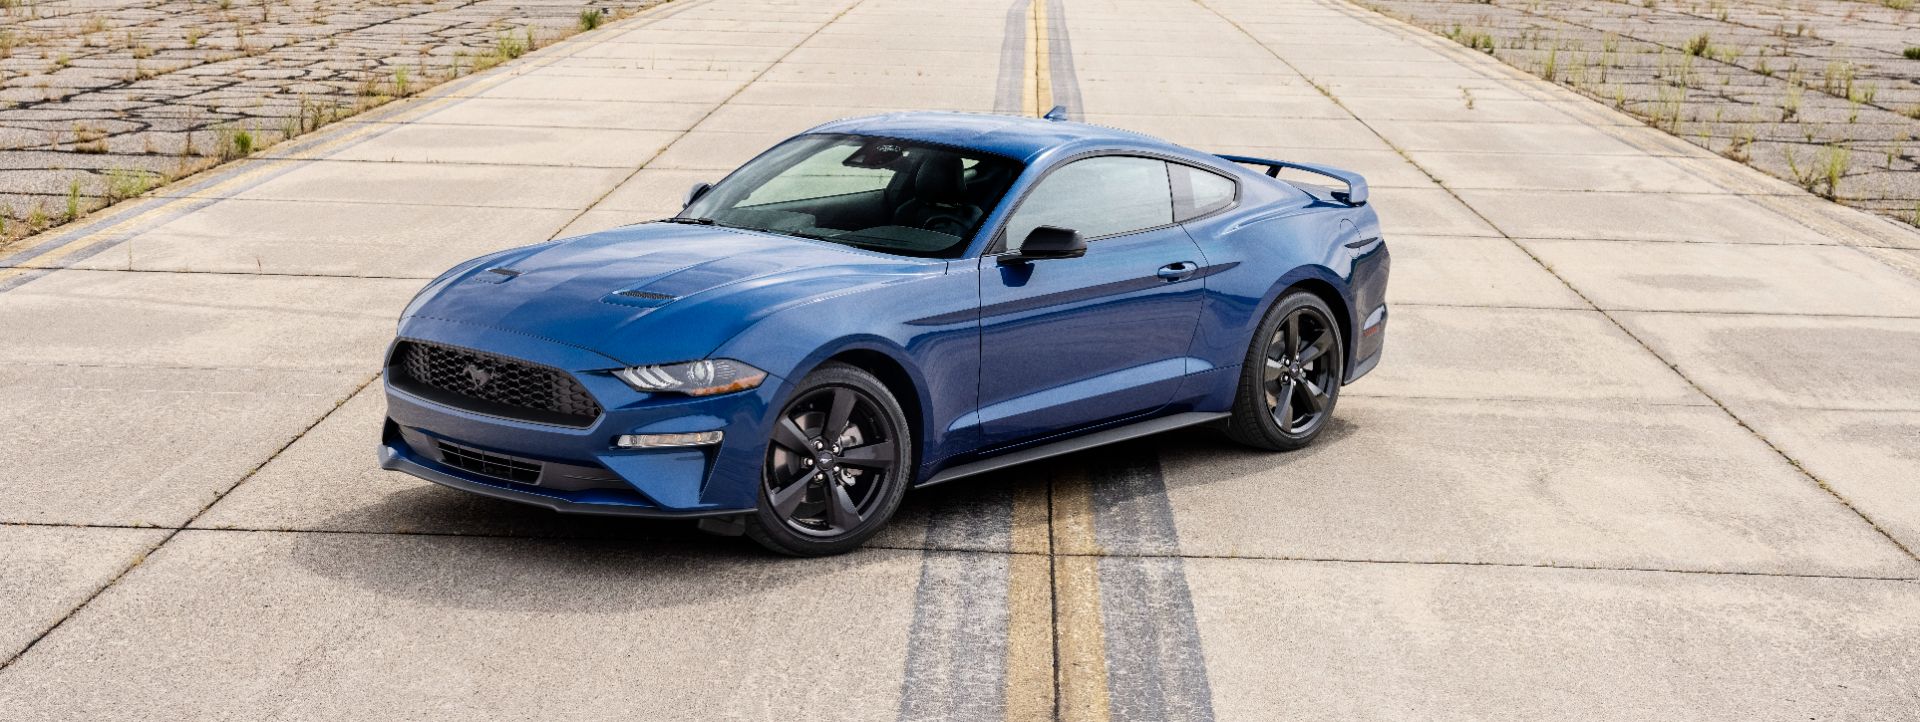 ford mustang stealth edition appearance package 9